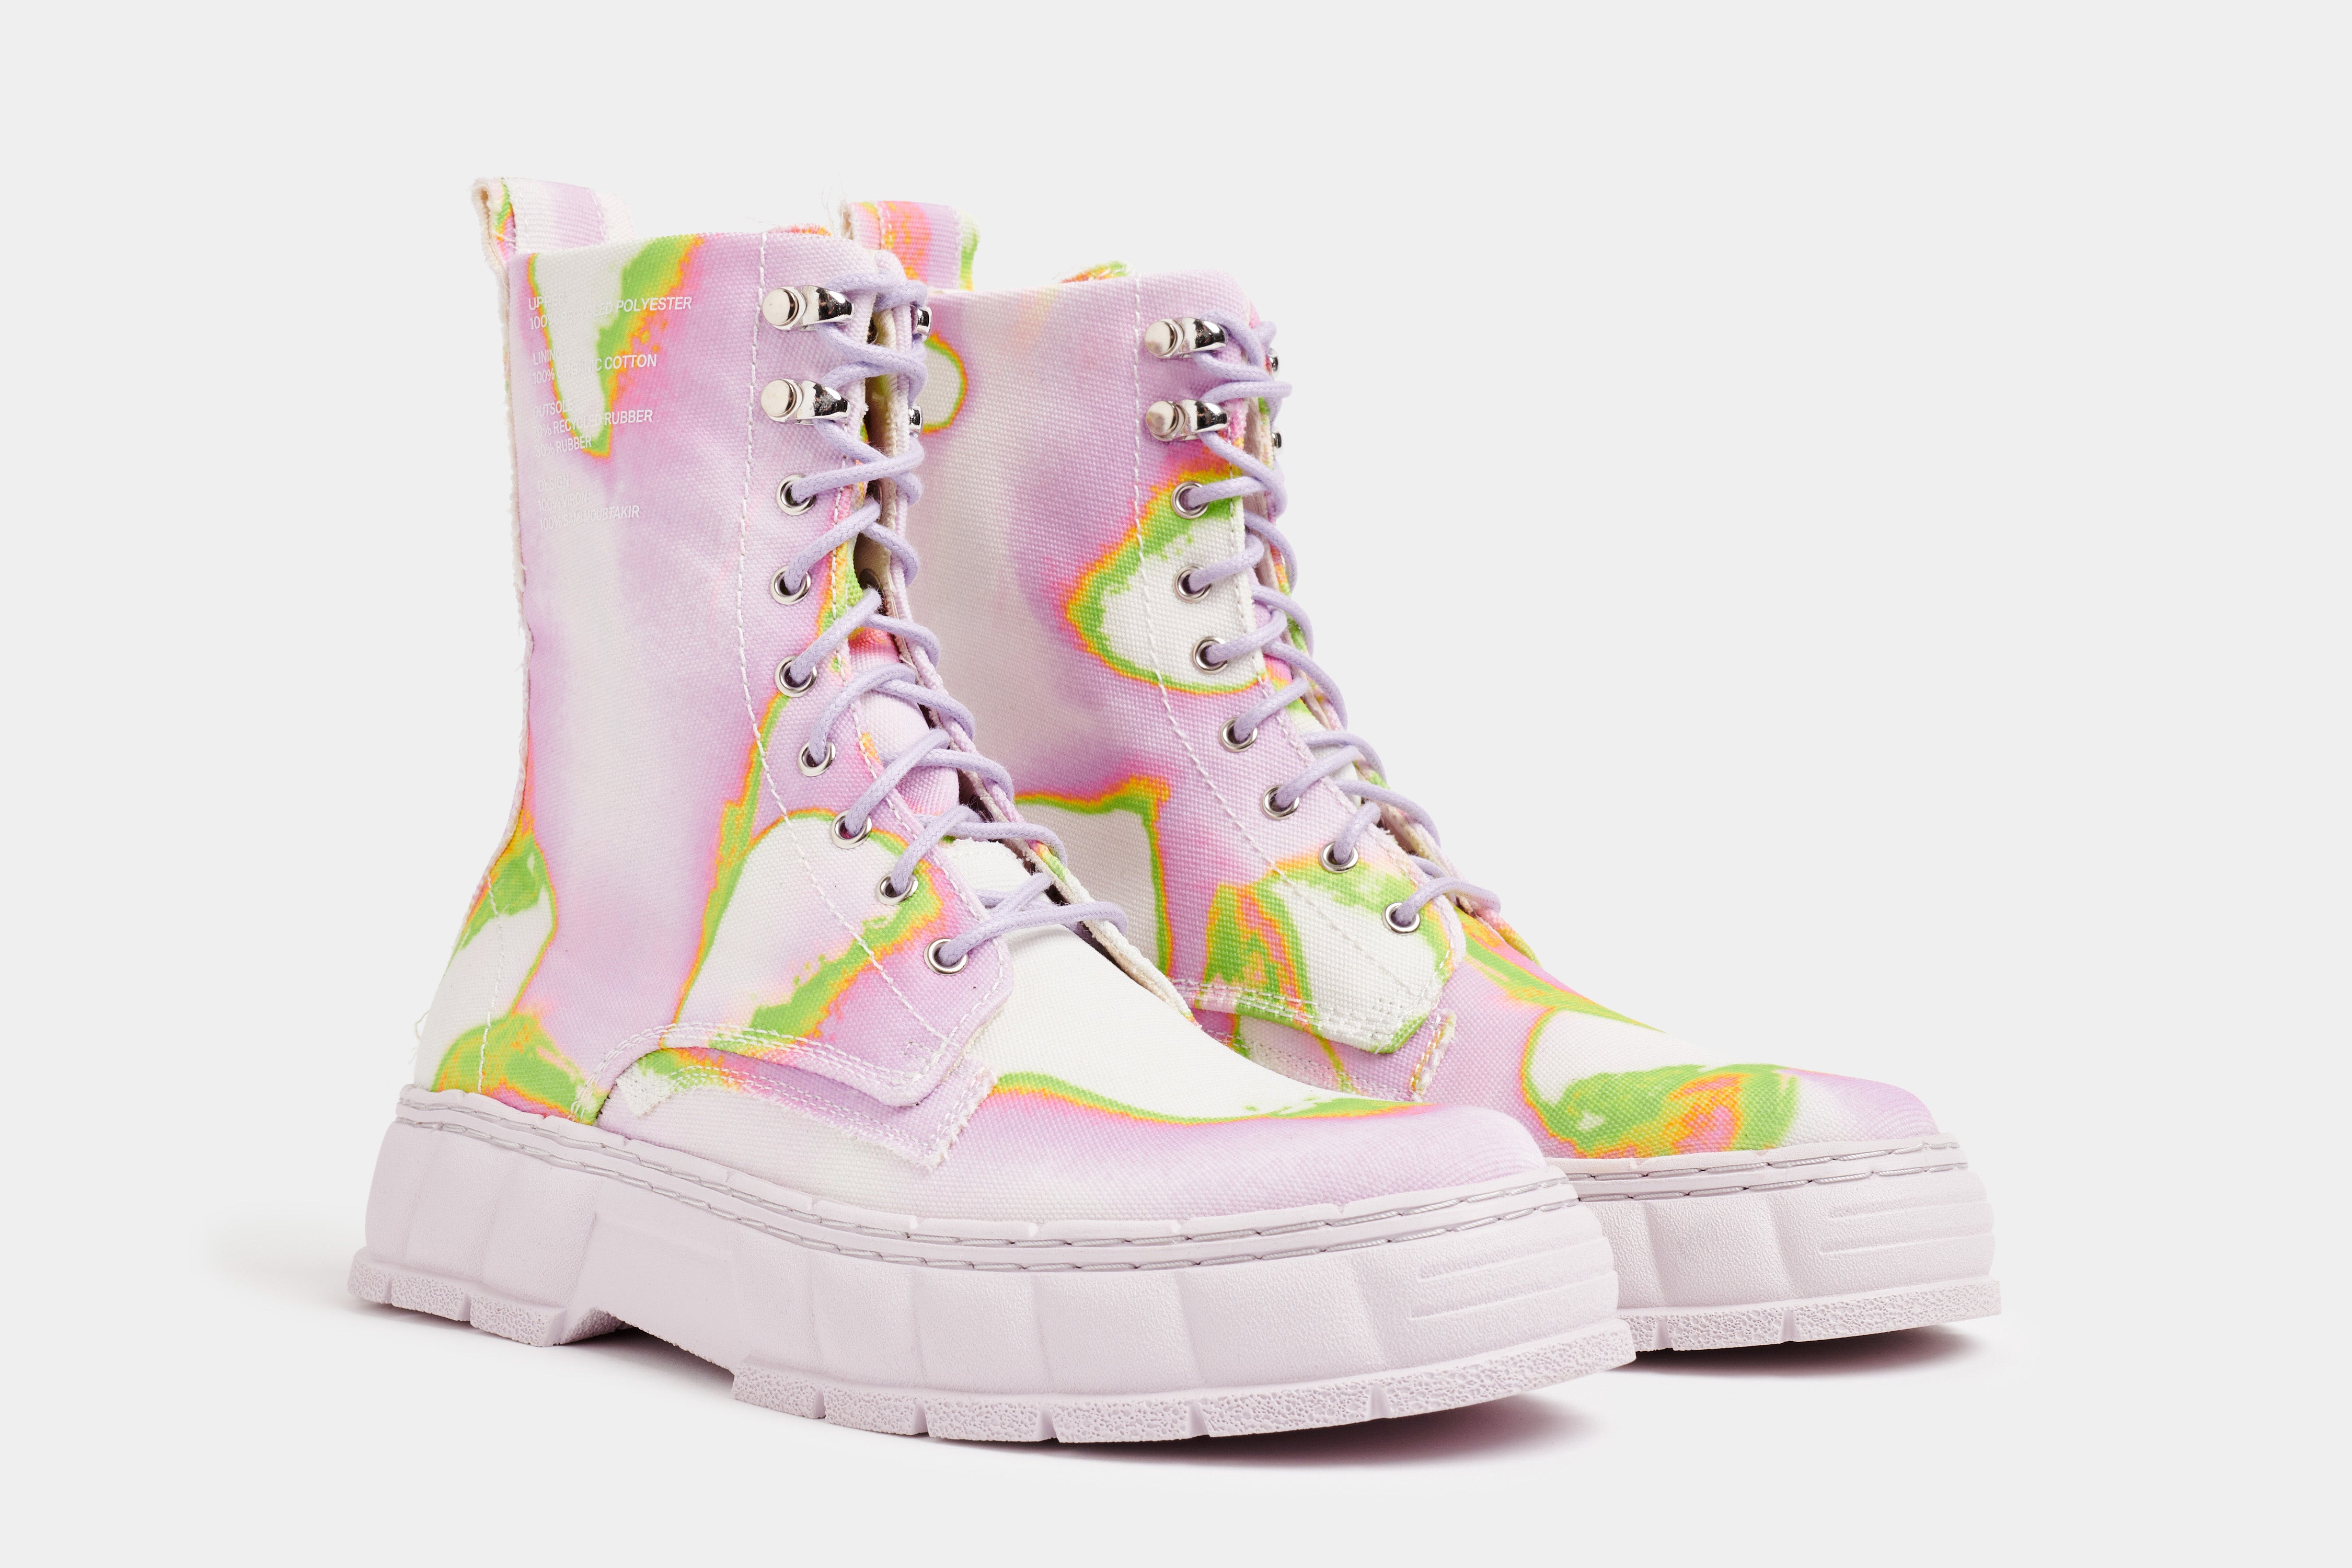 1992 Vegan combat boot made from recycled PET in pink and green shown from the front